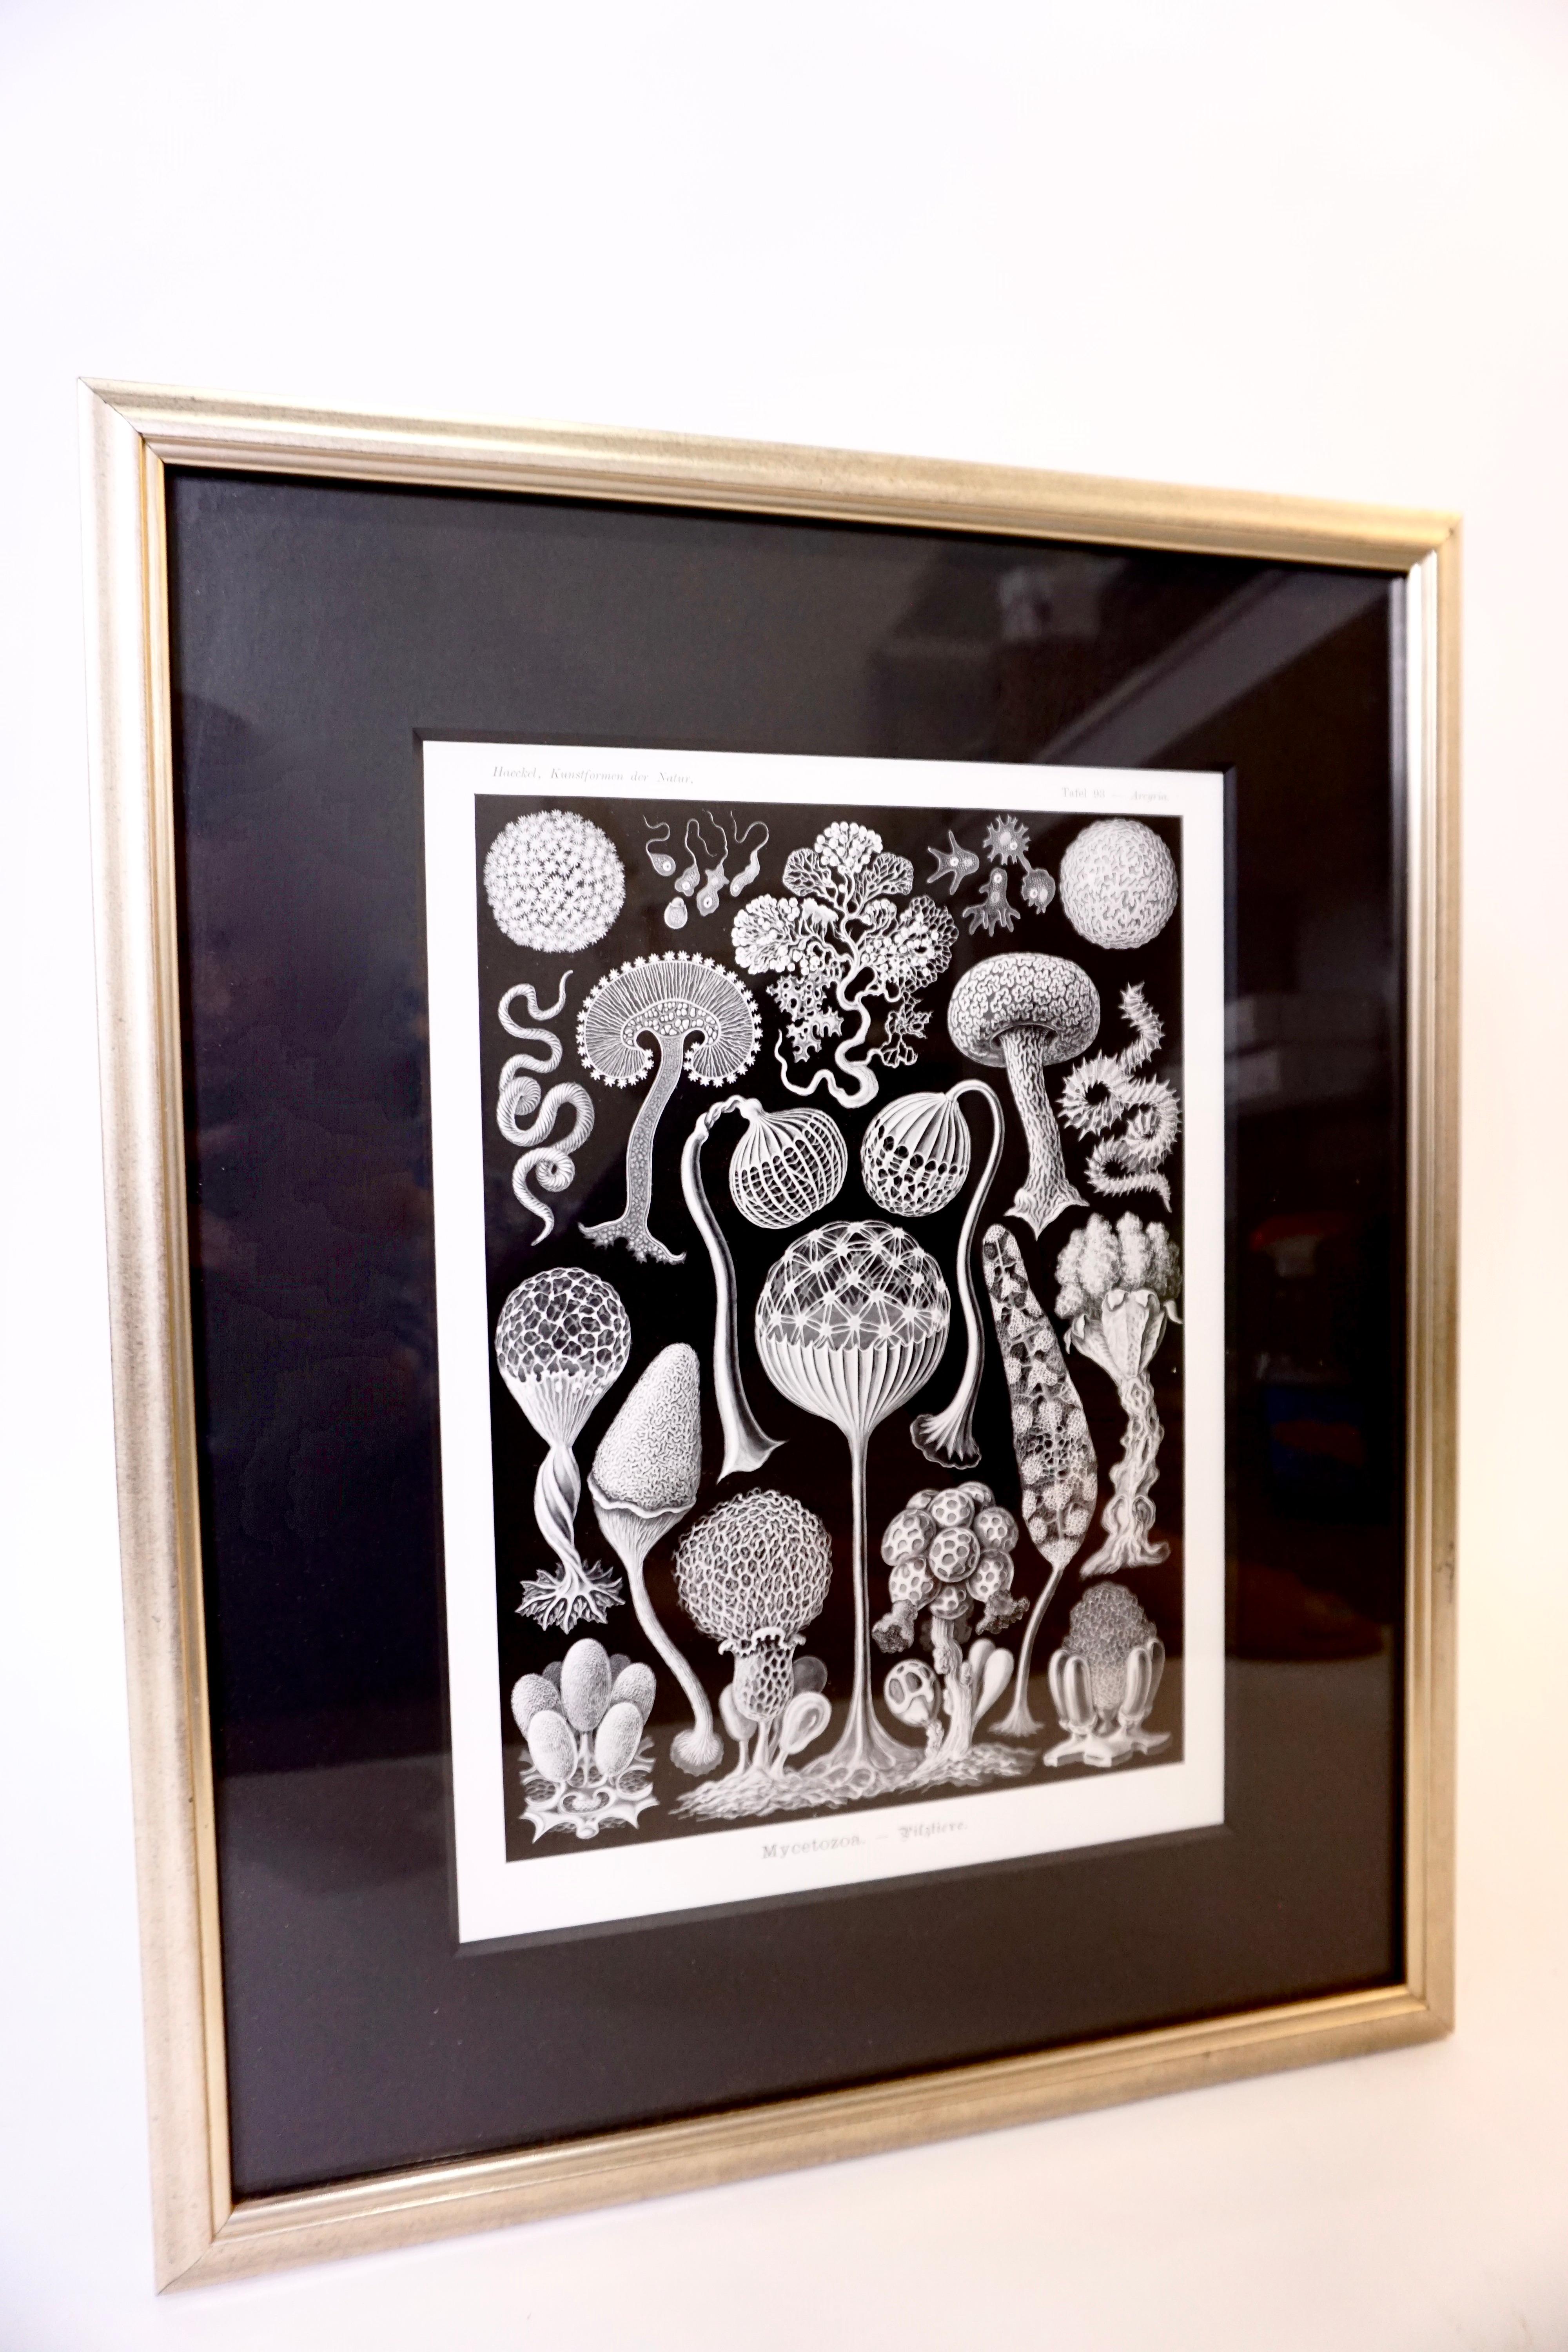 Produced between 1899-1904, German zoologist Ernst Haeckel's lithographs marine biological illustrations are as detailed as they are charming. Displayed in silver frames on black mats, these are eye-catching whether displayed as a single or as a